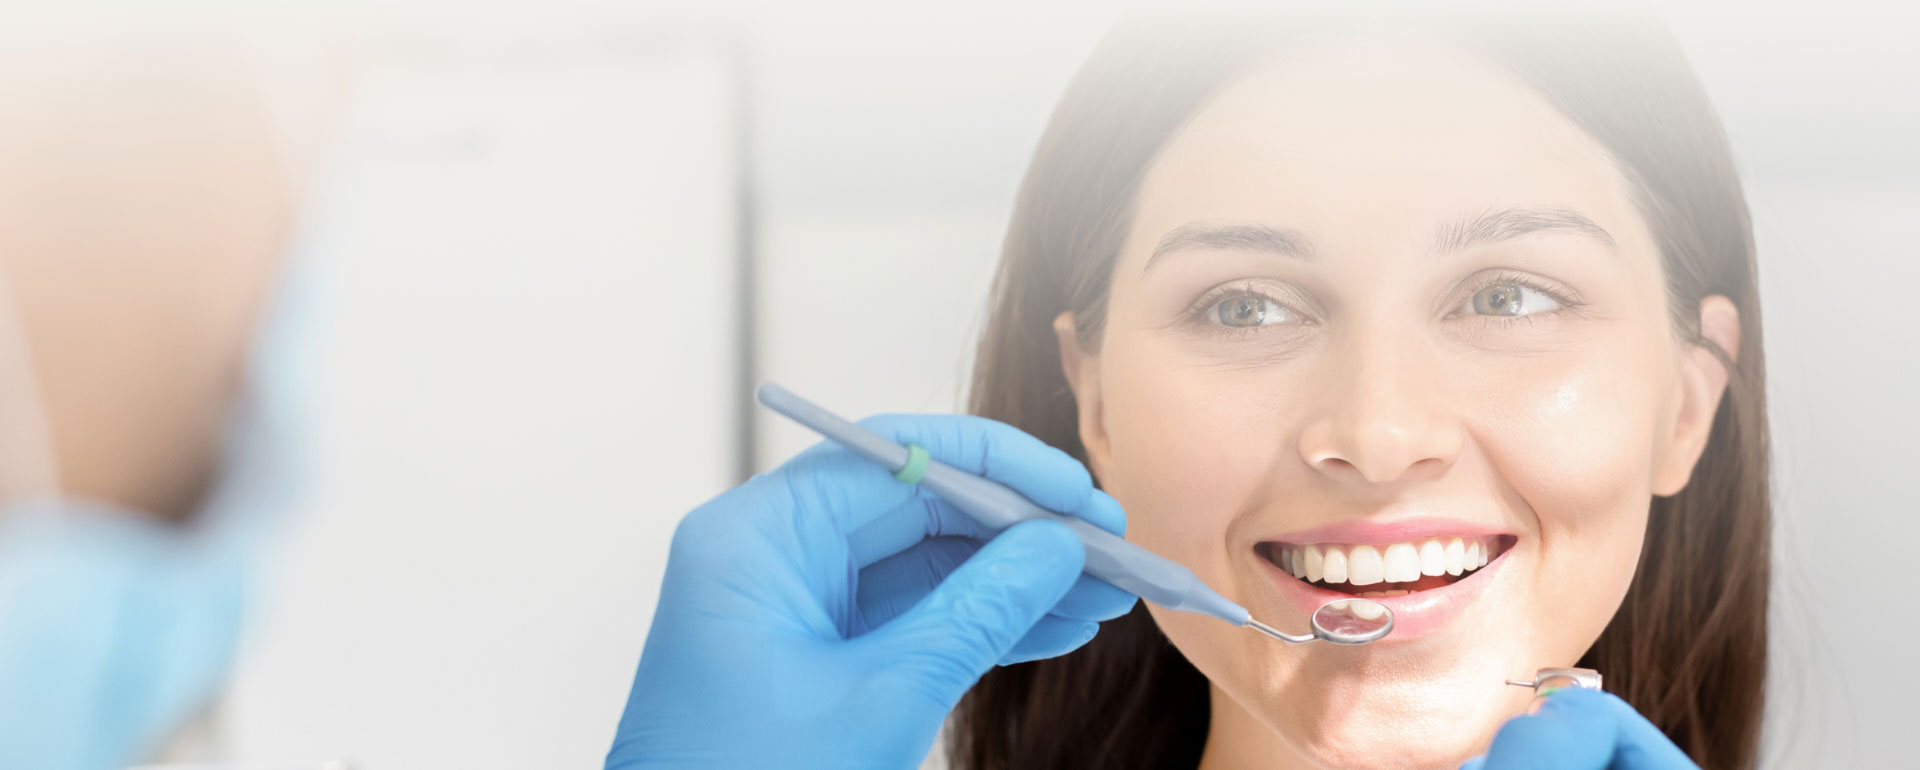 ABOUT Birmingham Family Dentistry